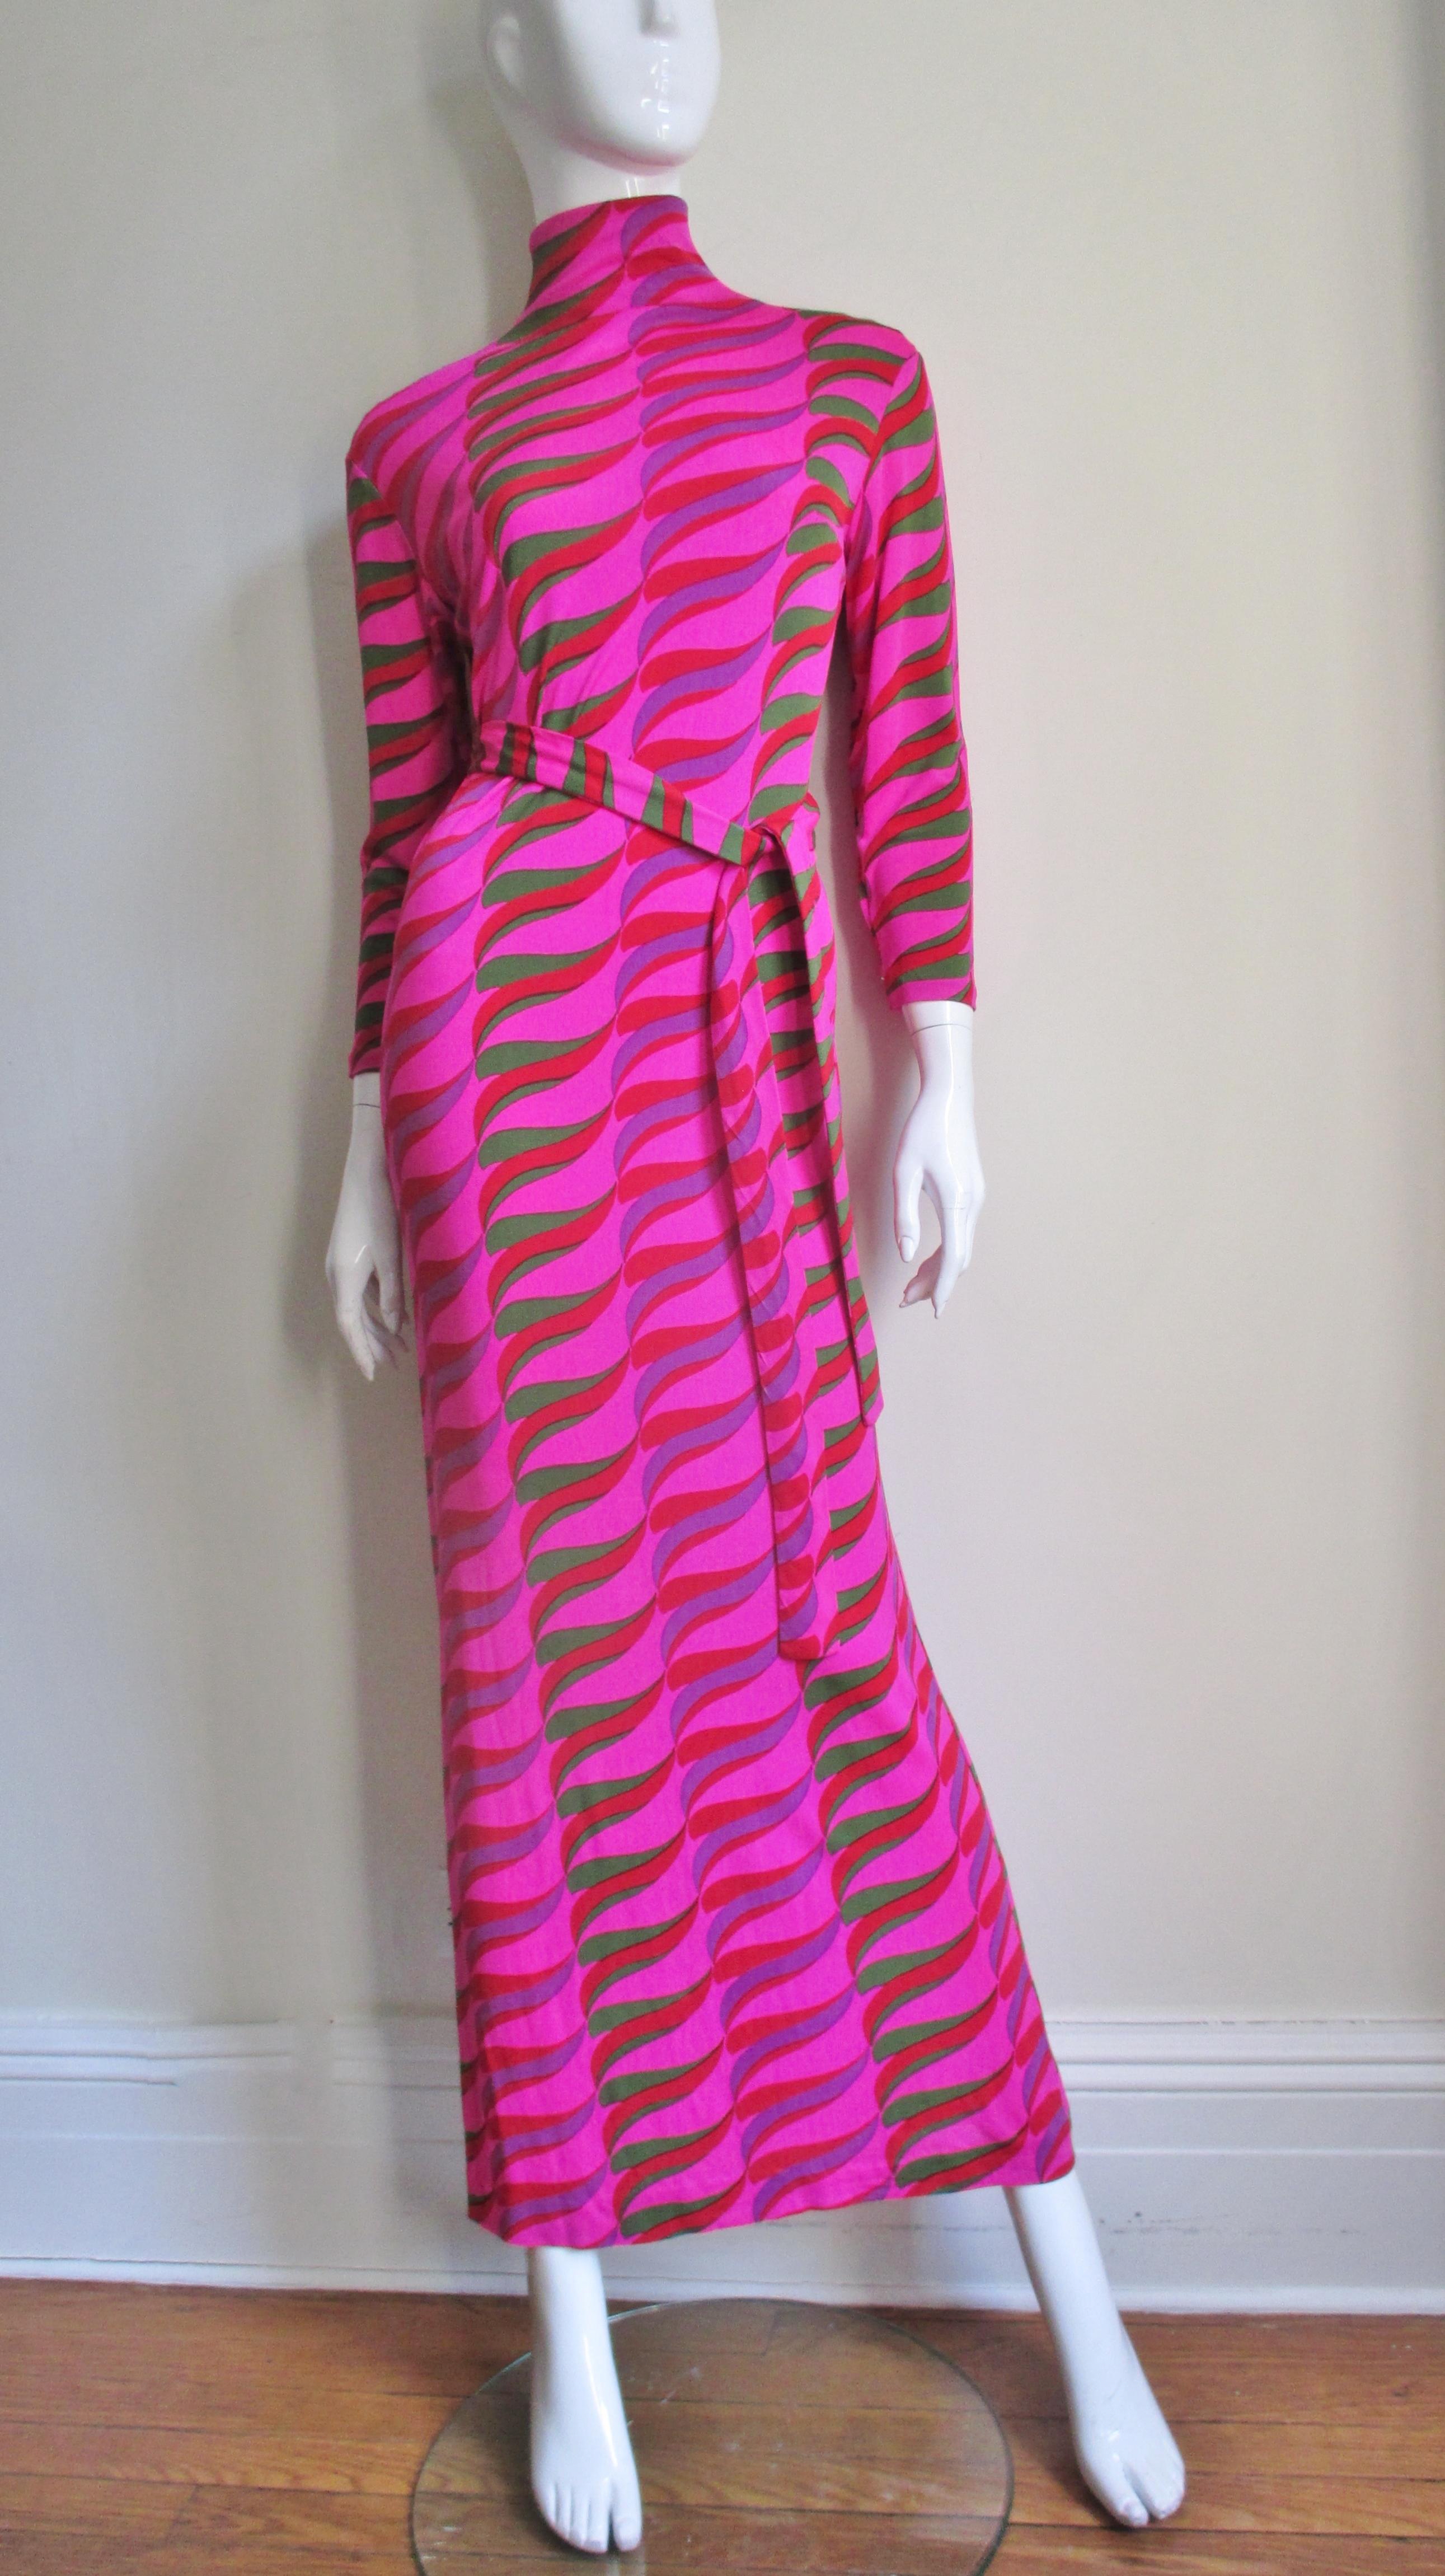 A silk knit long dress from La Mendola in a green, purple and red abstract pattern on a vibrant pink background.  It is a simple full length sheath with a stand up collar and 3/4 length sleeves.  The back closes with a row of self covered buttons